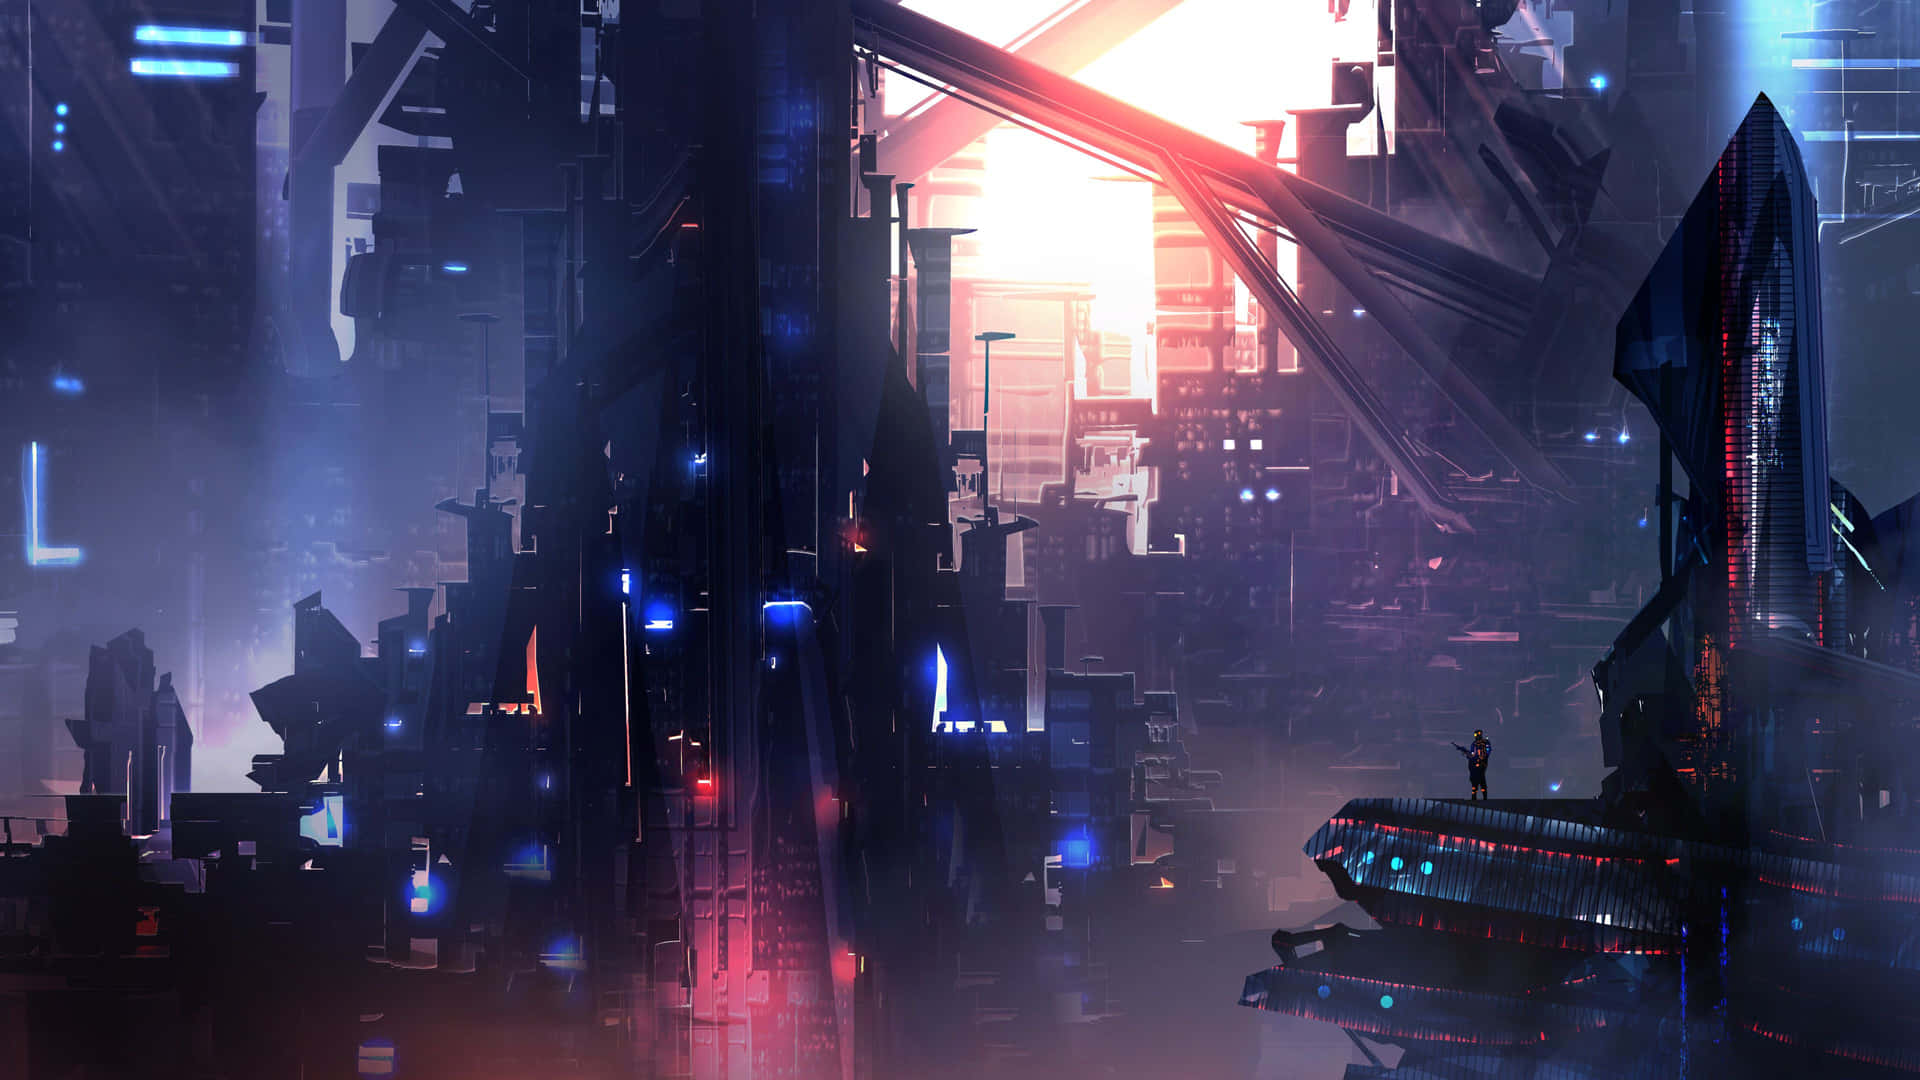 Explore the world of cyberpunk with this retro-futuristic aesthetic. Wallpaper